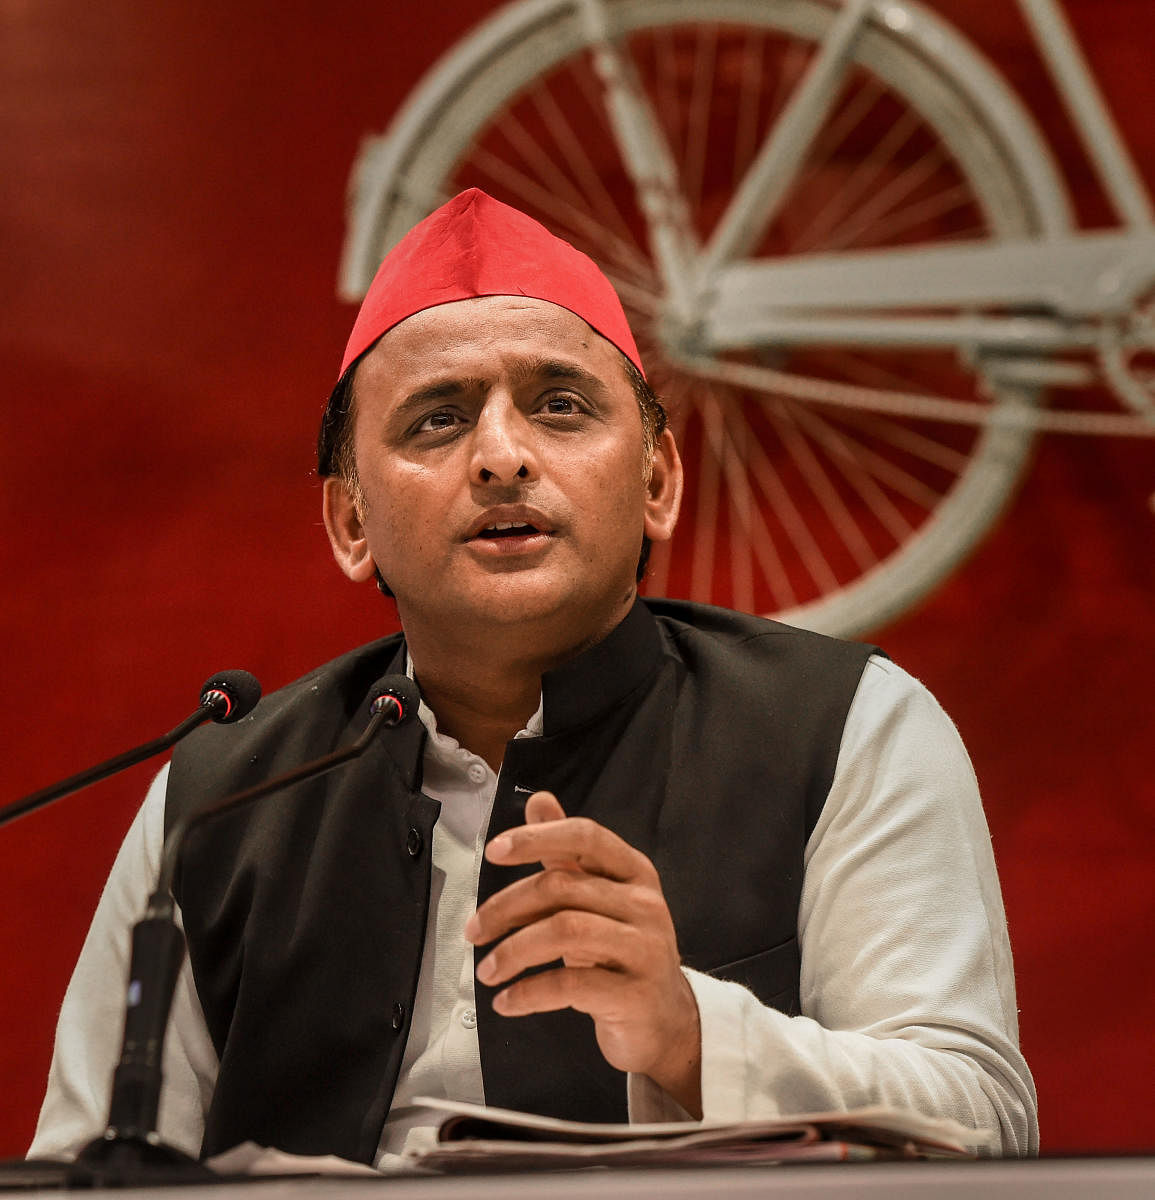 Akhilesh Yadav said that people should not be surprised if the biography of chief minister Yogi Adityanath made its way into the syllabus and the latter delivered religious sermons in the class rooms.